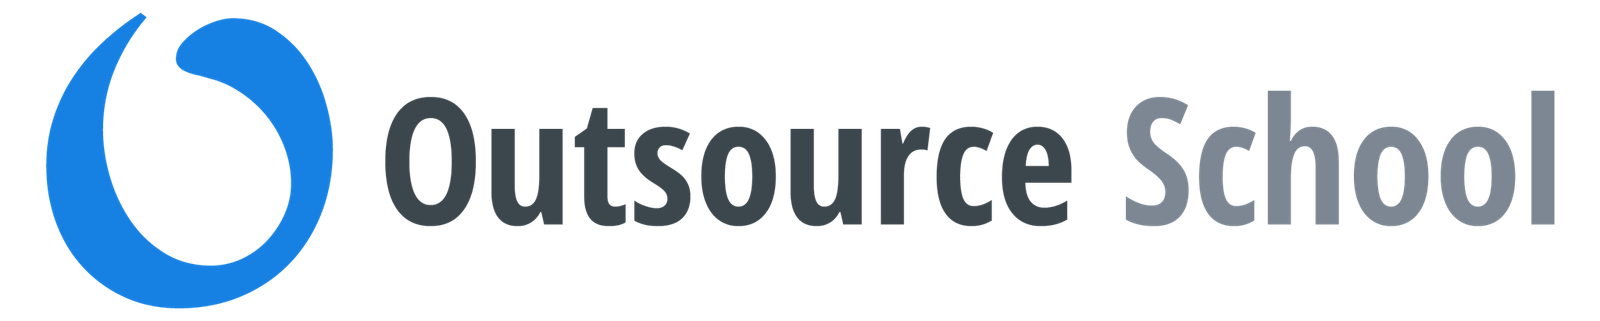 Outsource School valuable experiences review